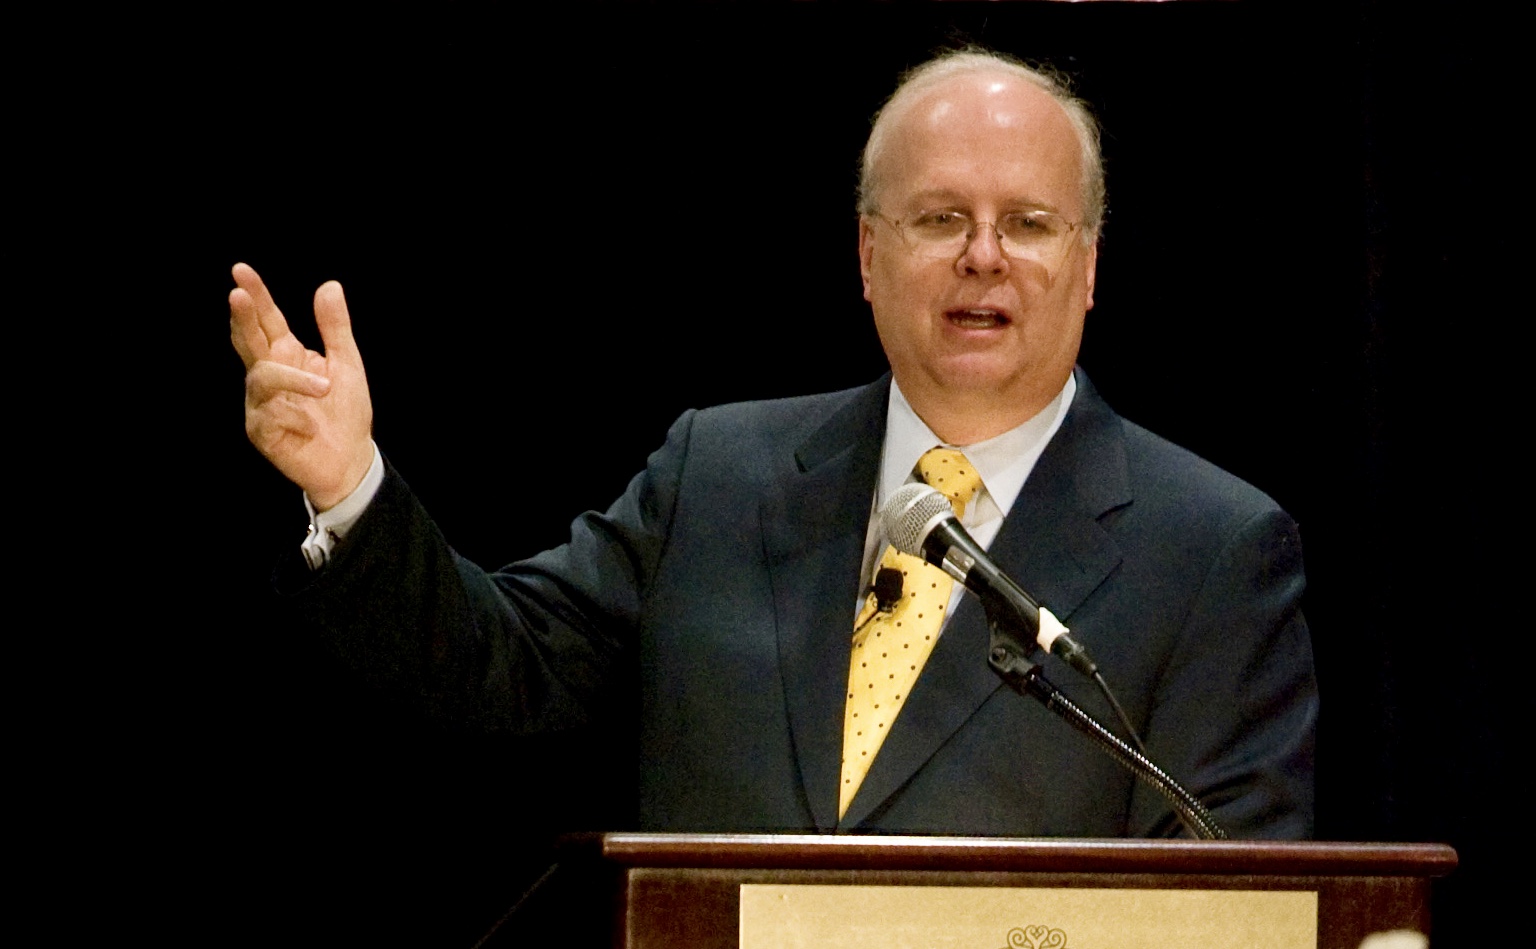 <p><strong>Karl Rove is a foremost voice on election cycles</strong></p>